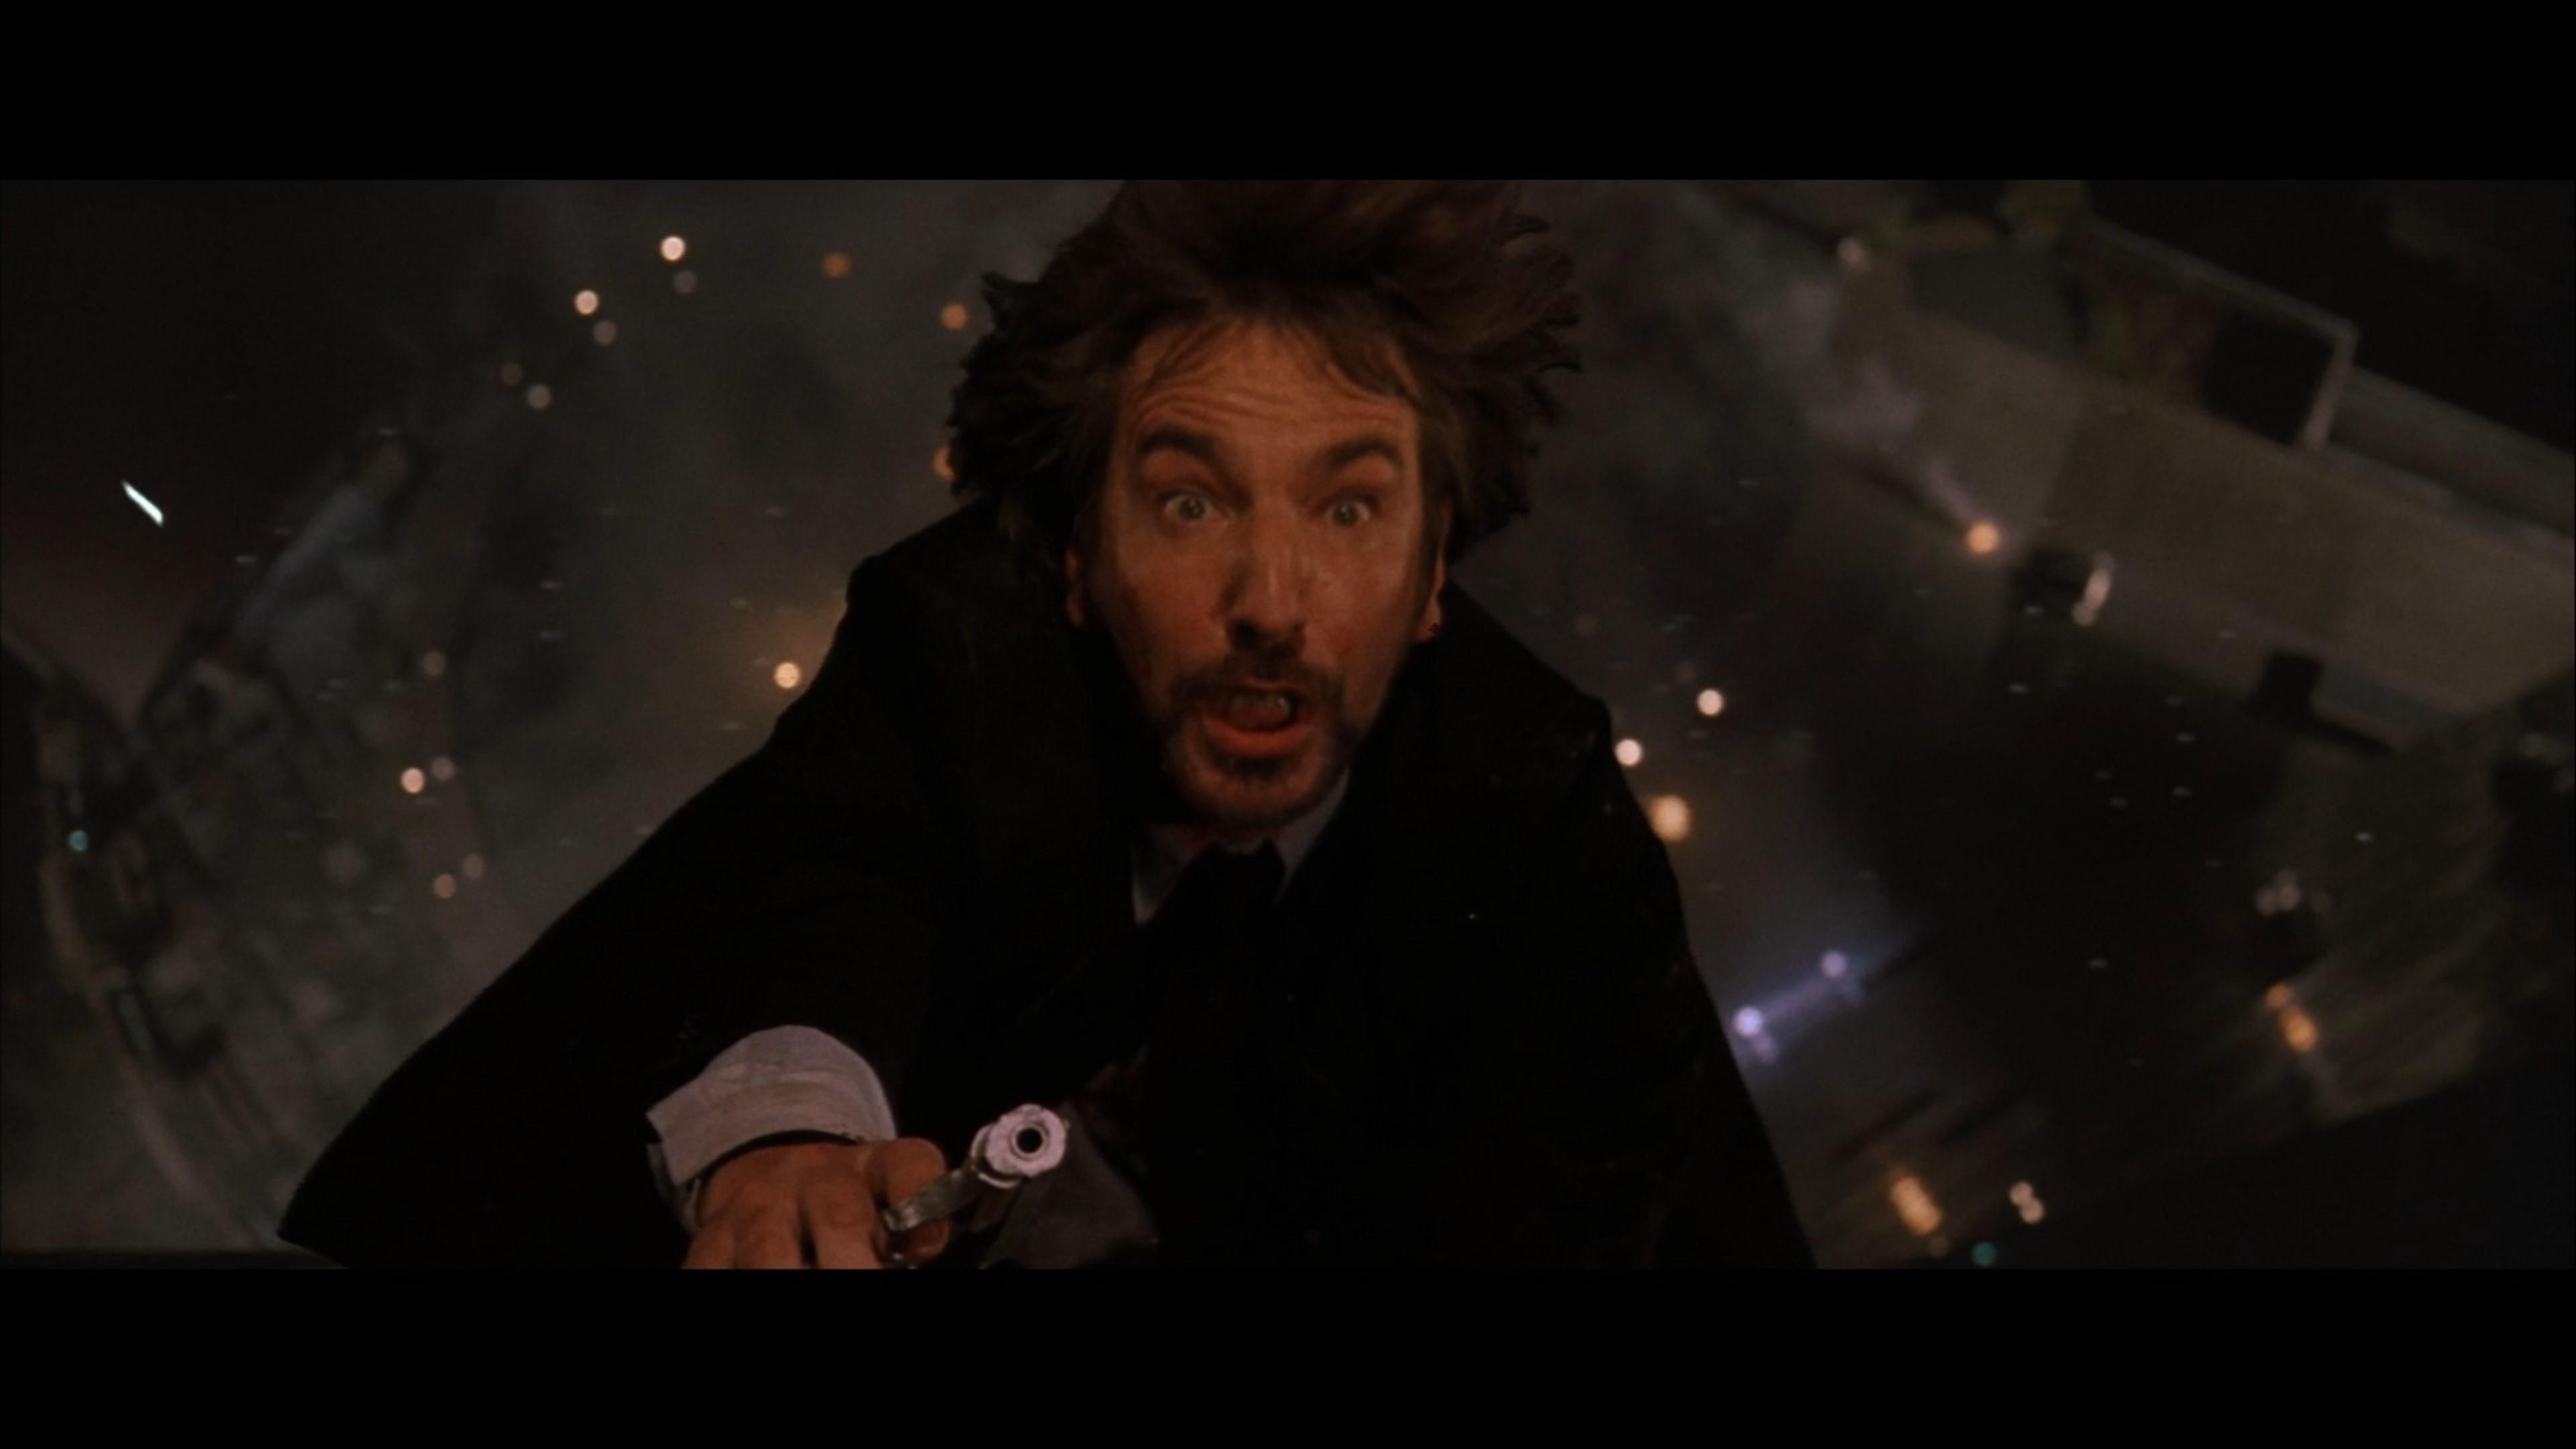 It's not Christmas until Hans Gruber falls off the 30th floor of Nakatomi Plaza.